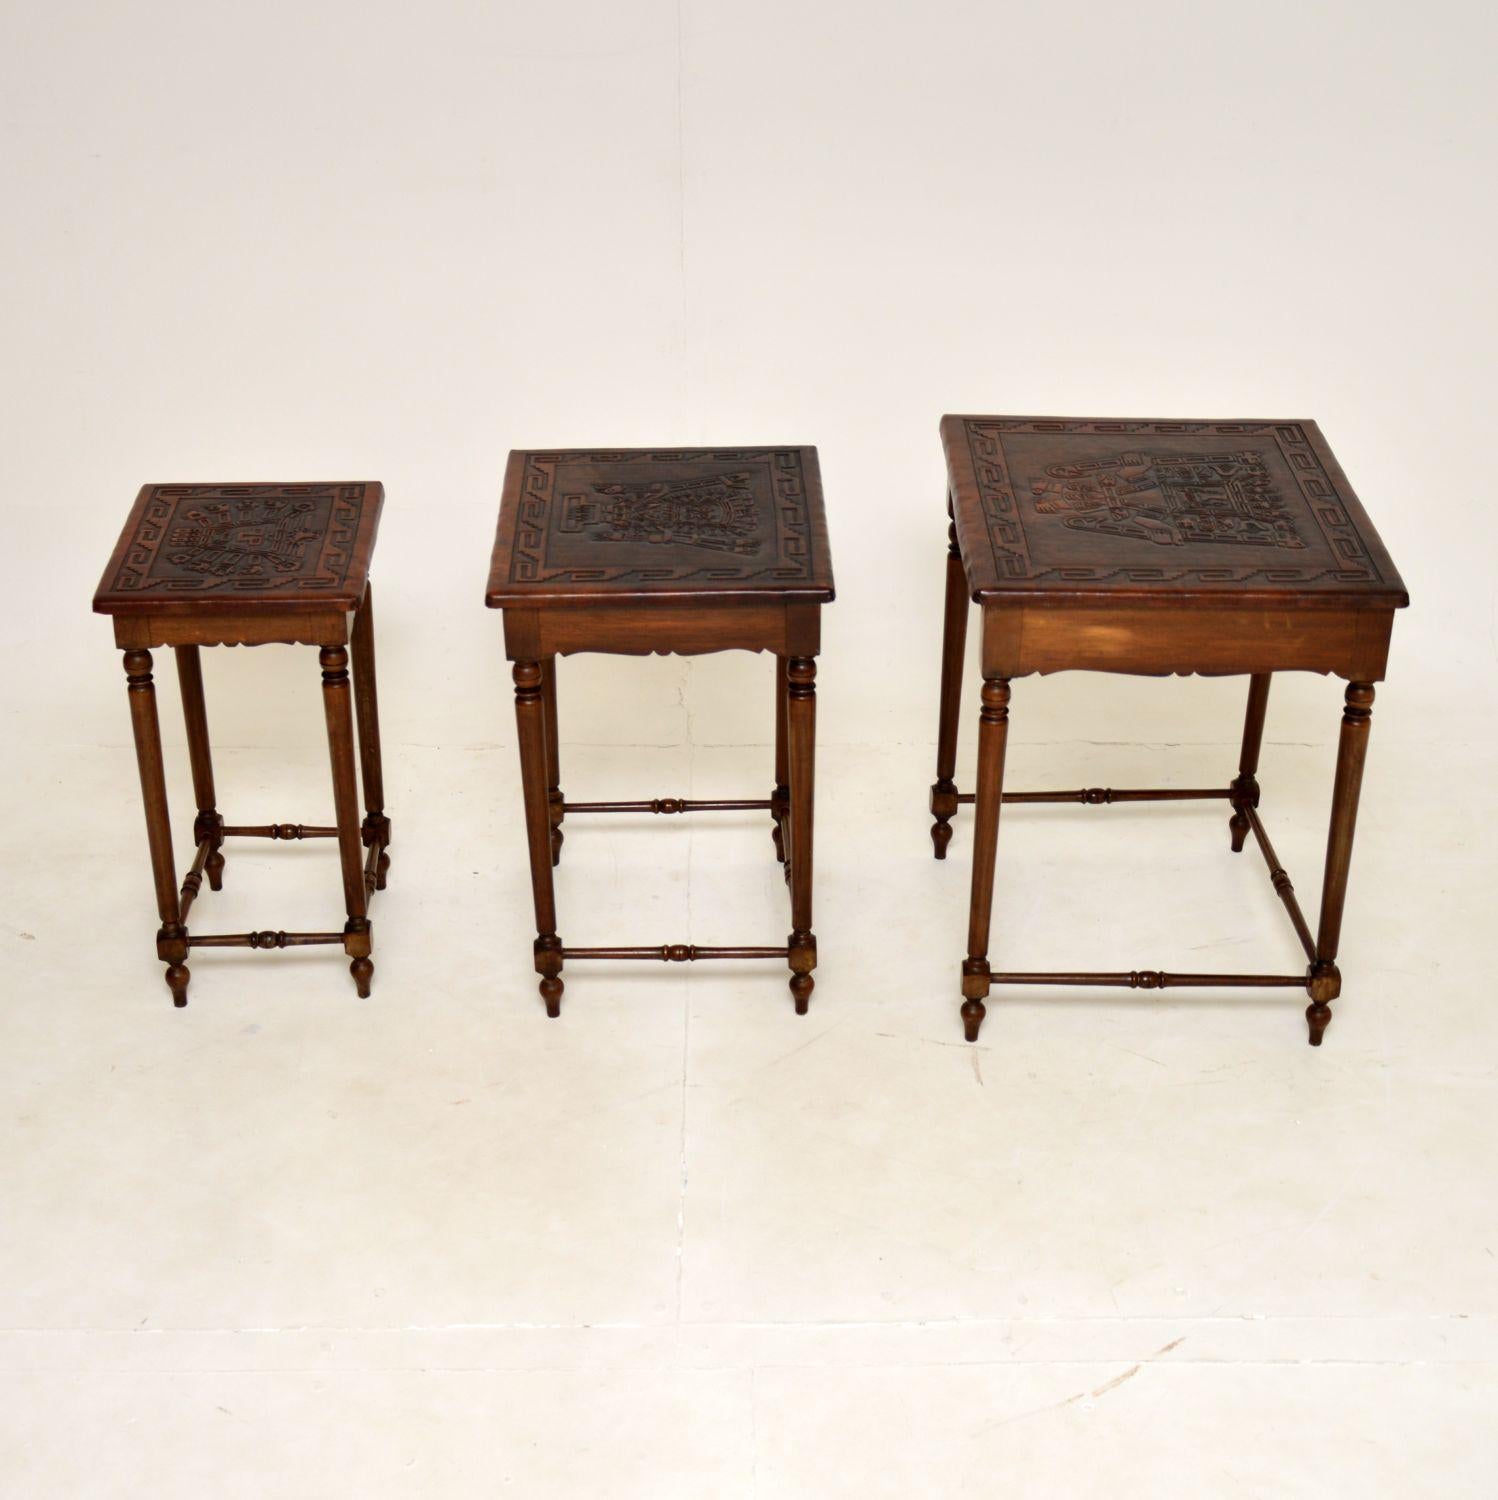 Antique Embossed Leather Top Nest of Tables In Good Condition For Sale In London, GB